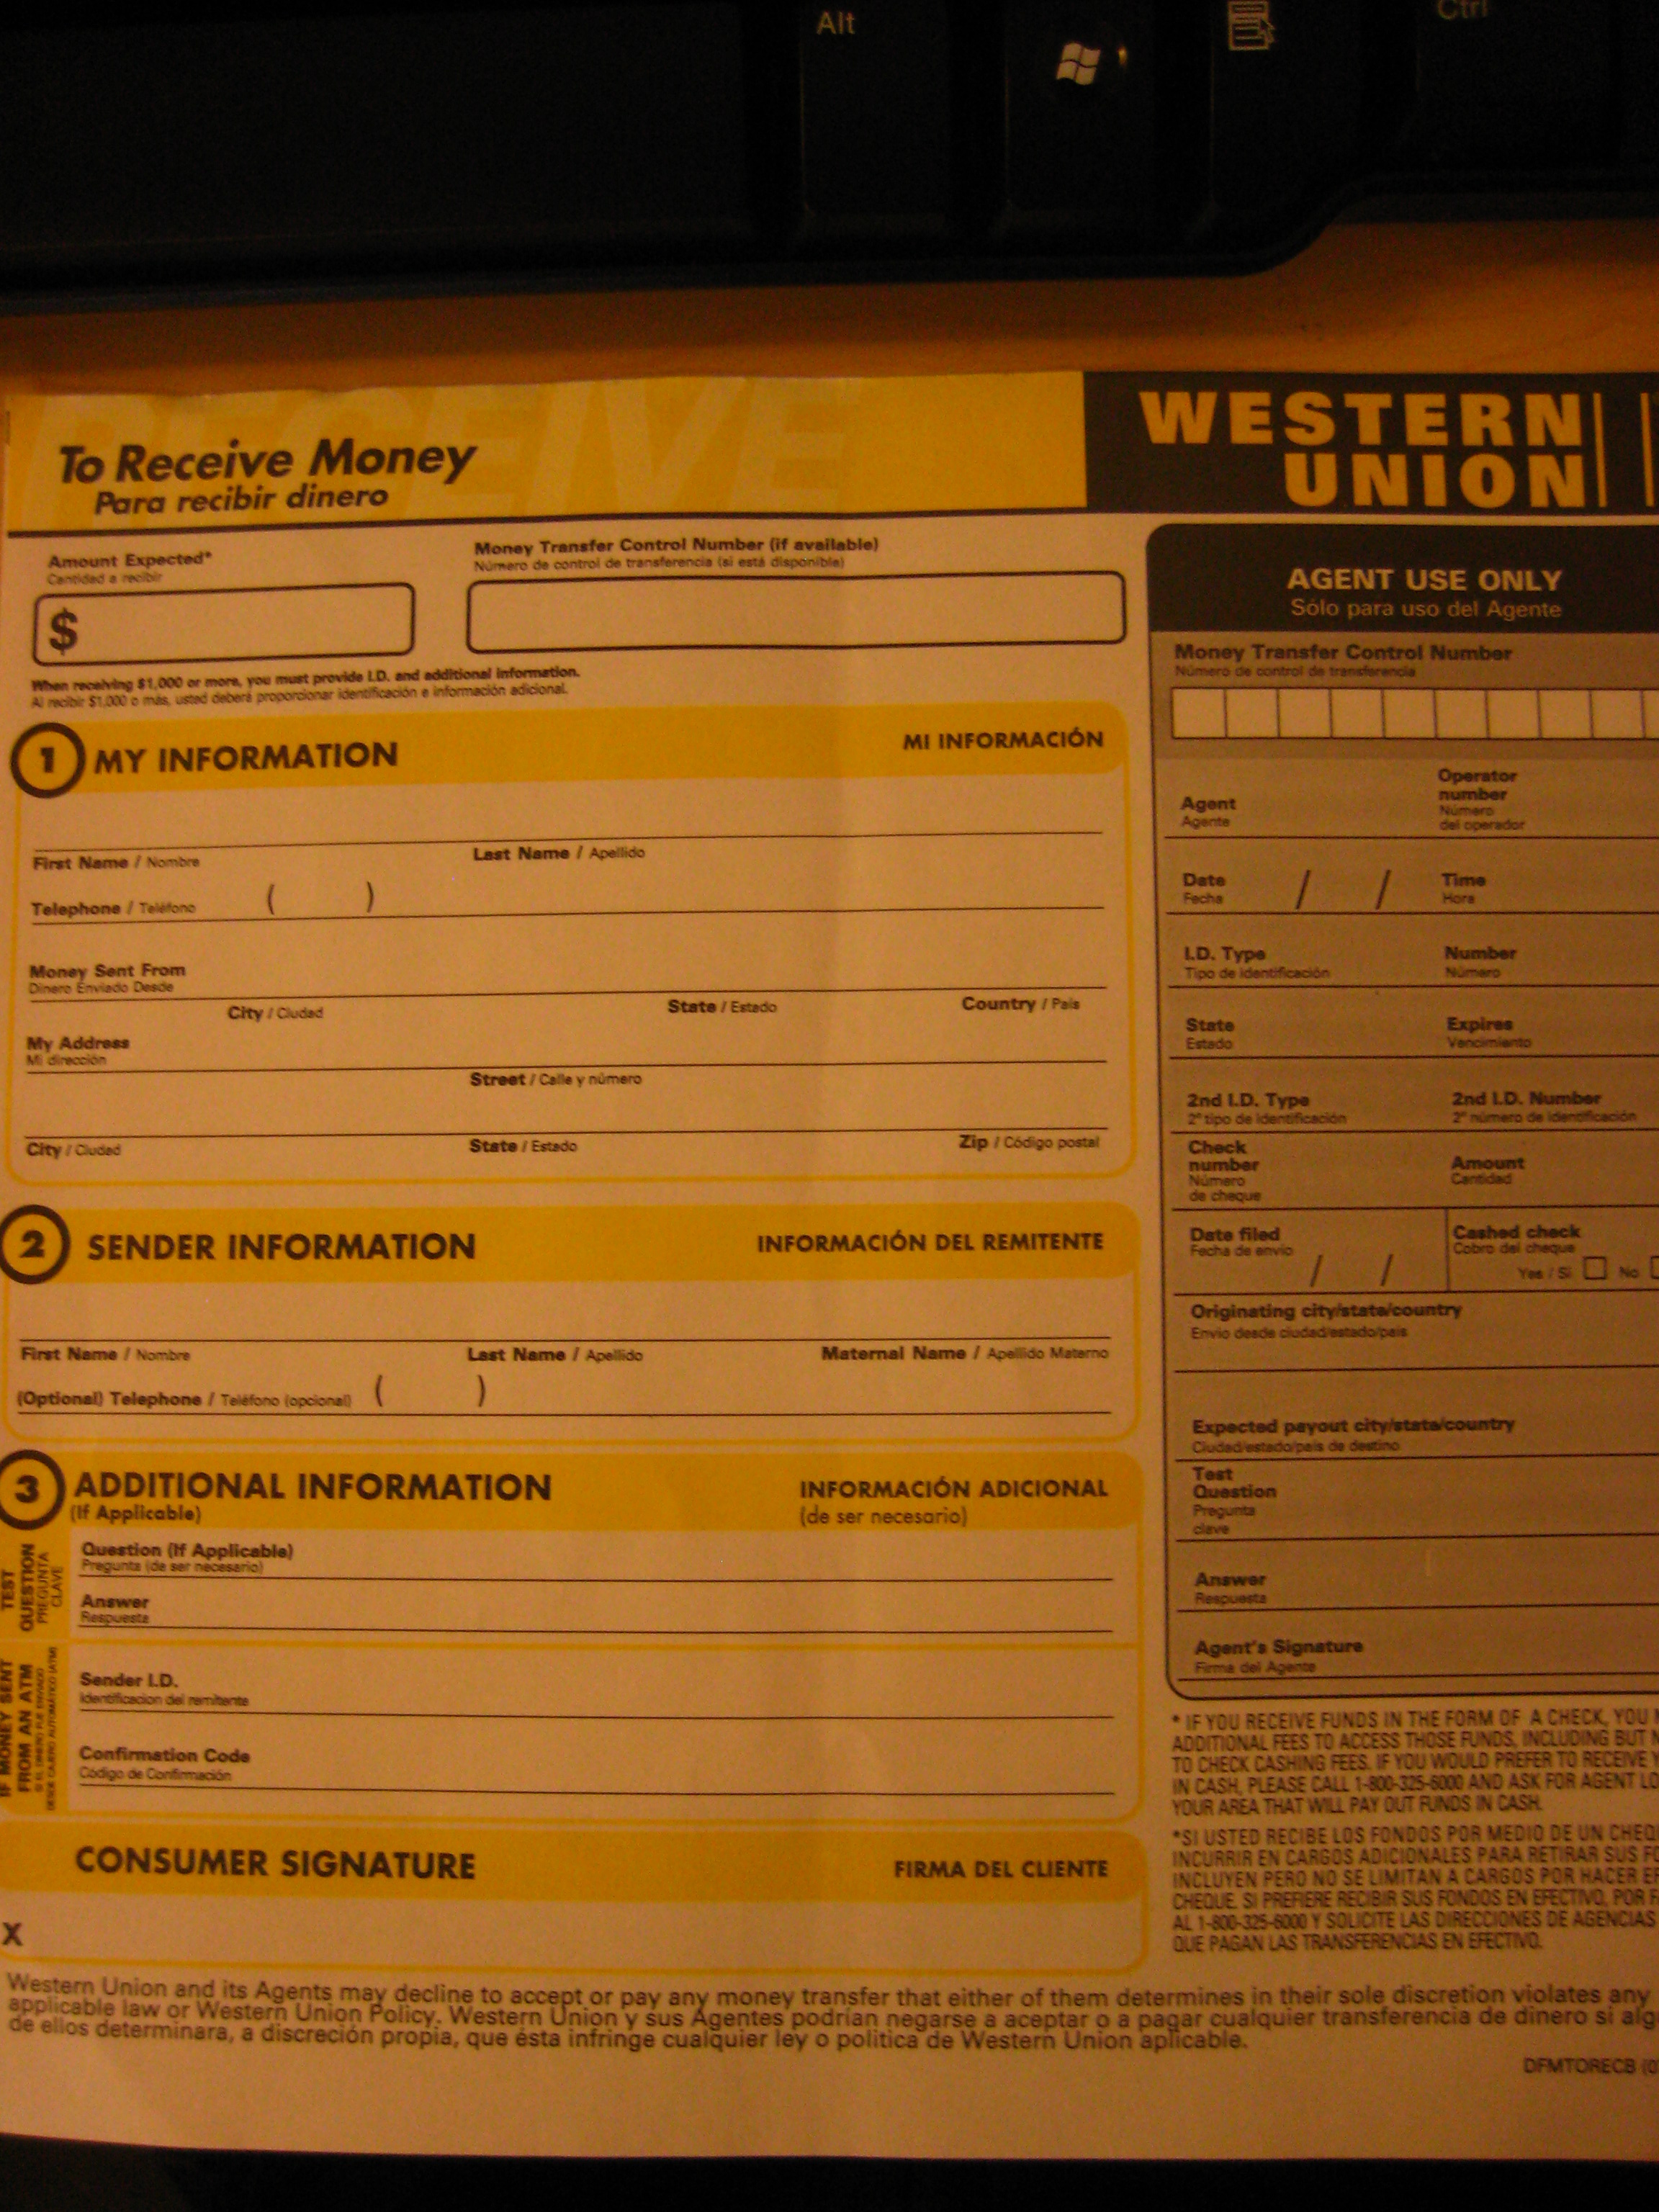 Why would western union block a receiver